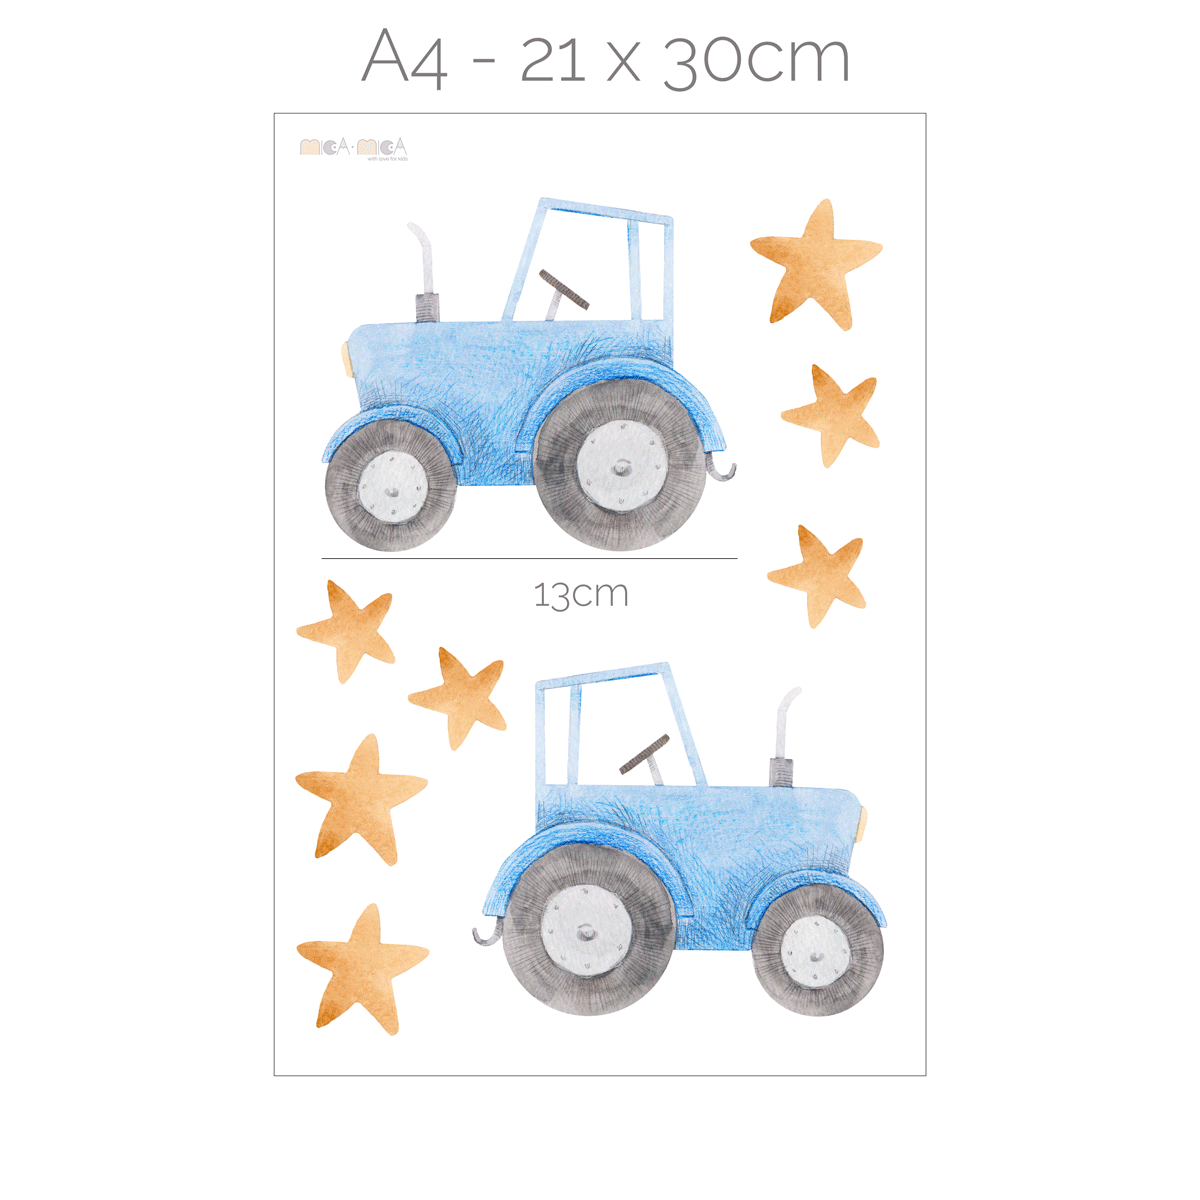 Tractor wall stickers - Blue